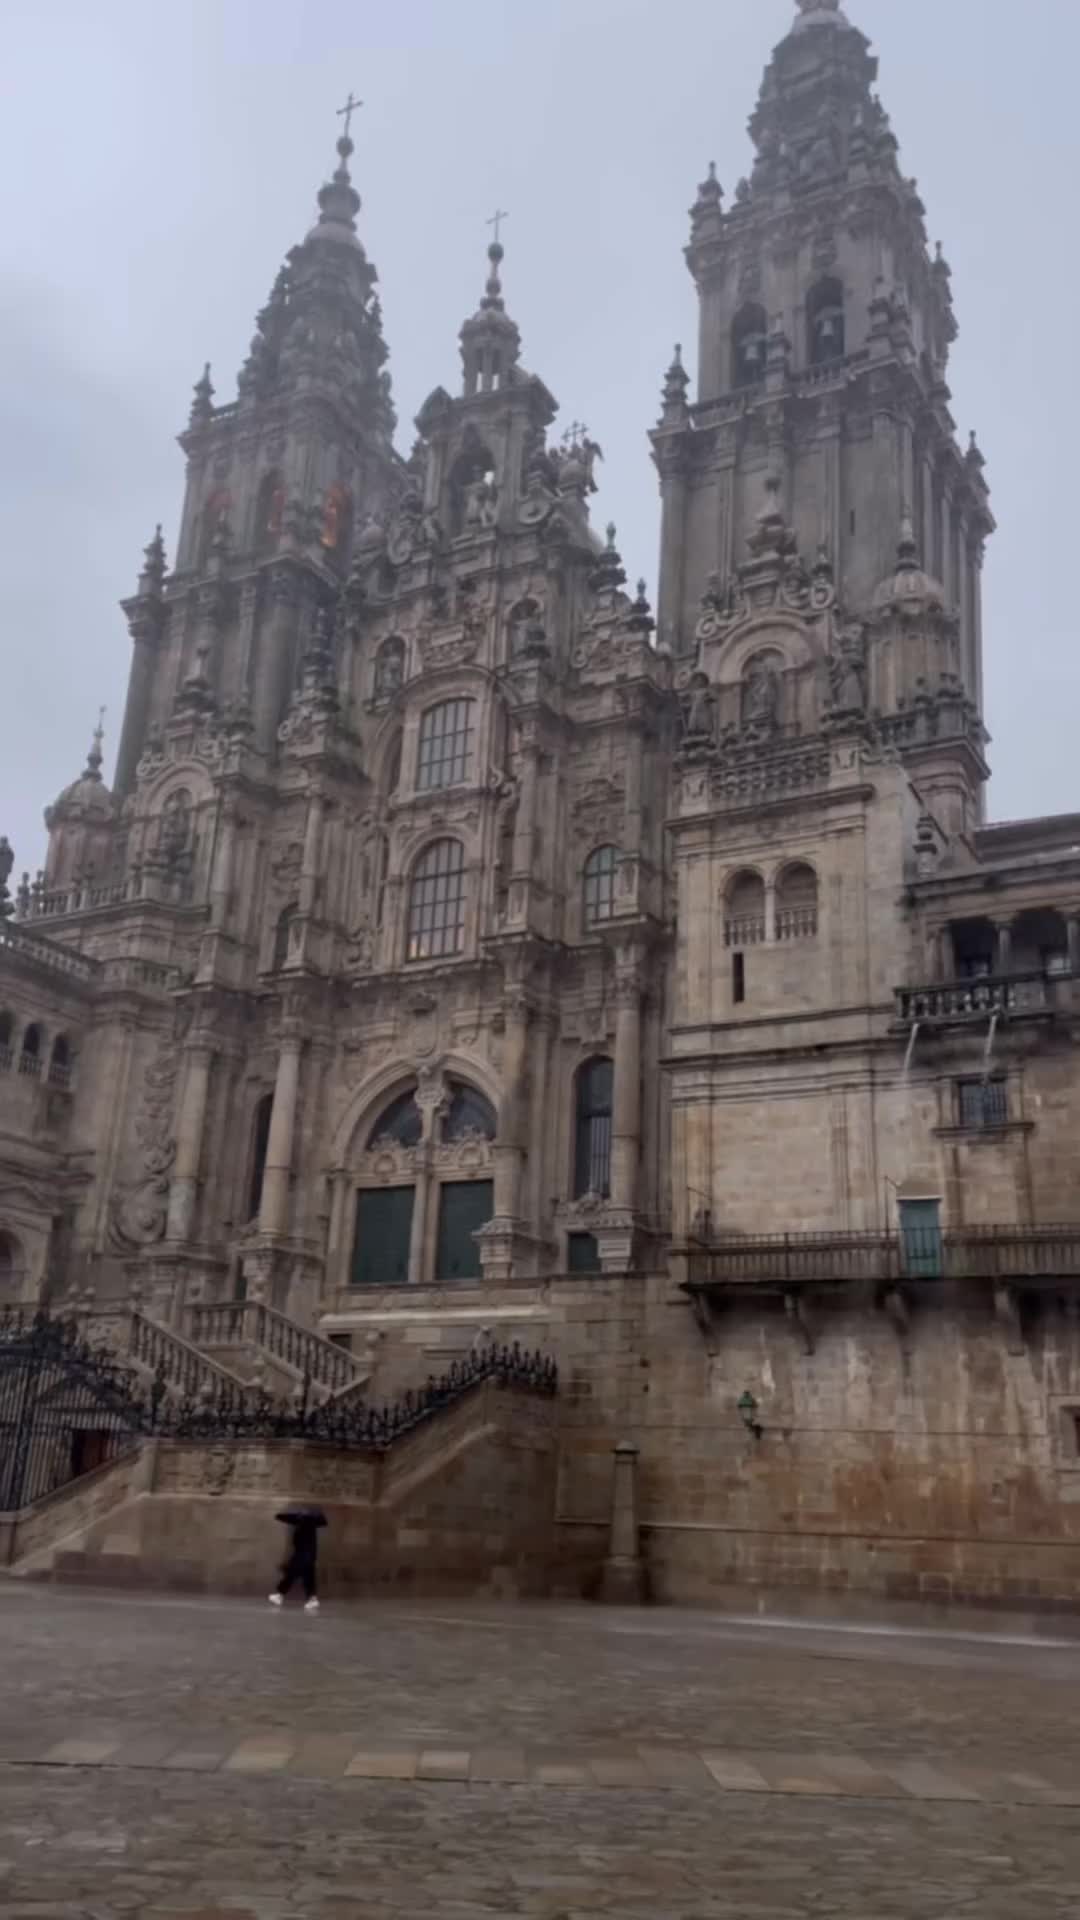 Completing The Camino: A Journey of Grief and Gratitude